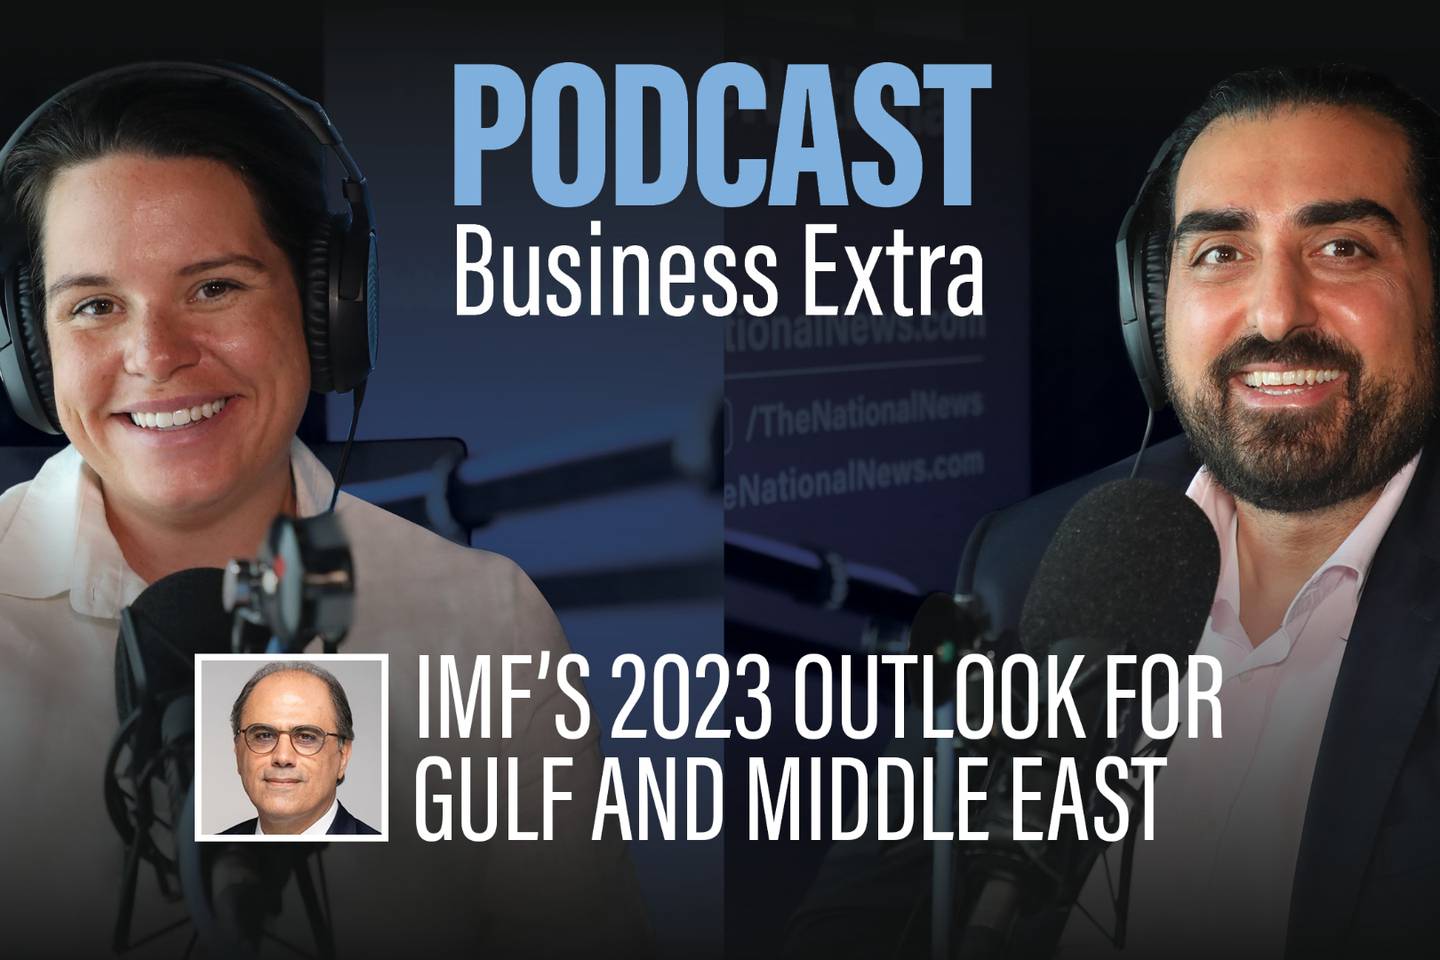 IMF's 2023 outlook for Gulf and Middle East - Business Extra